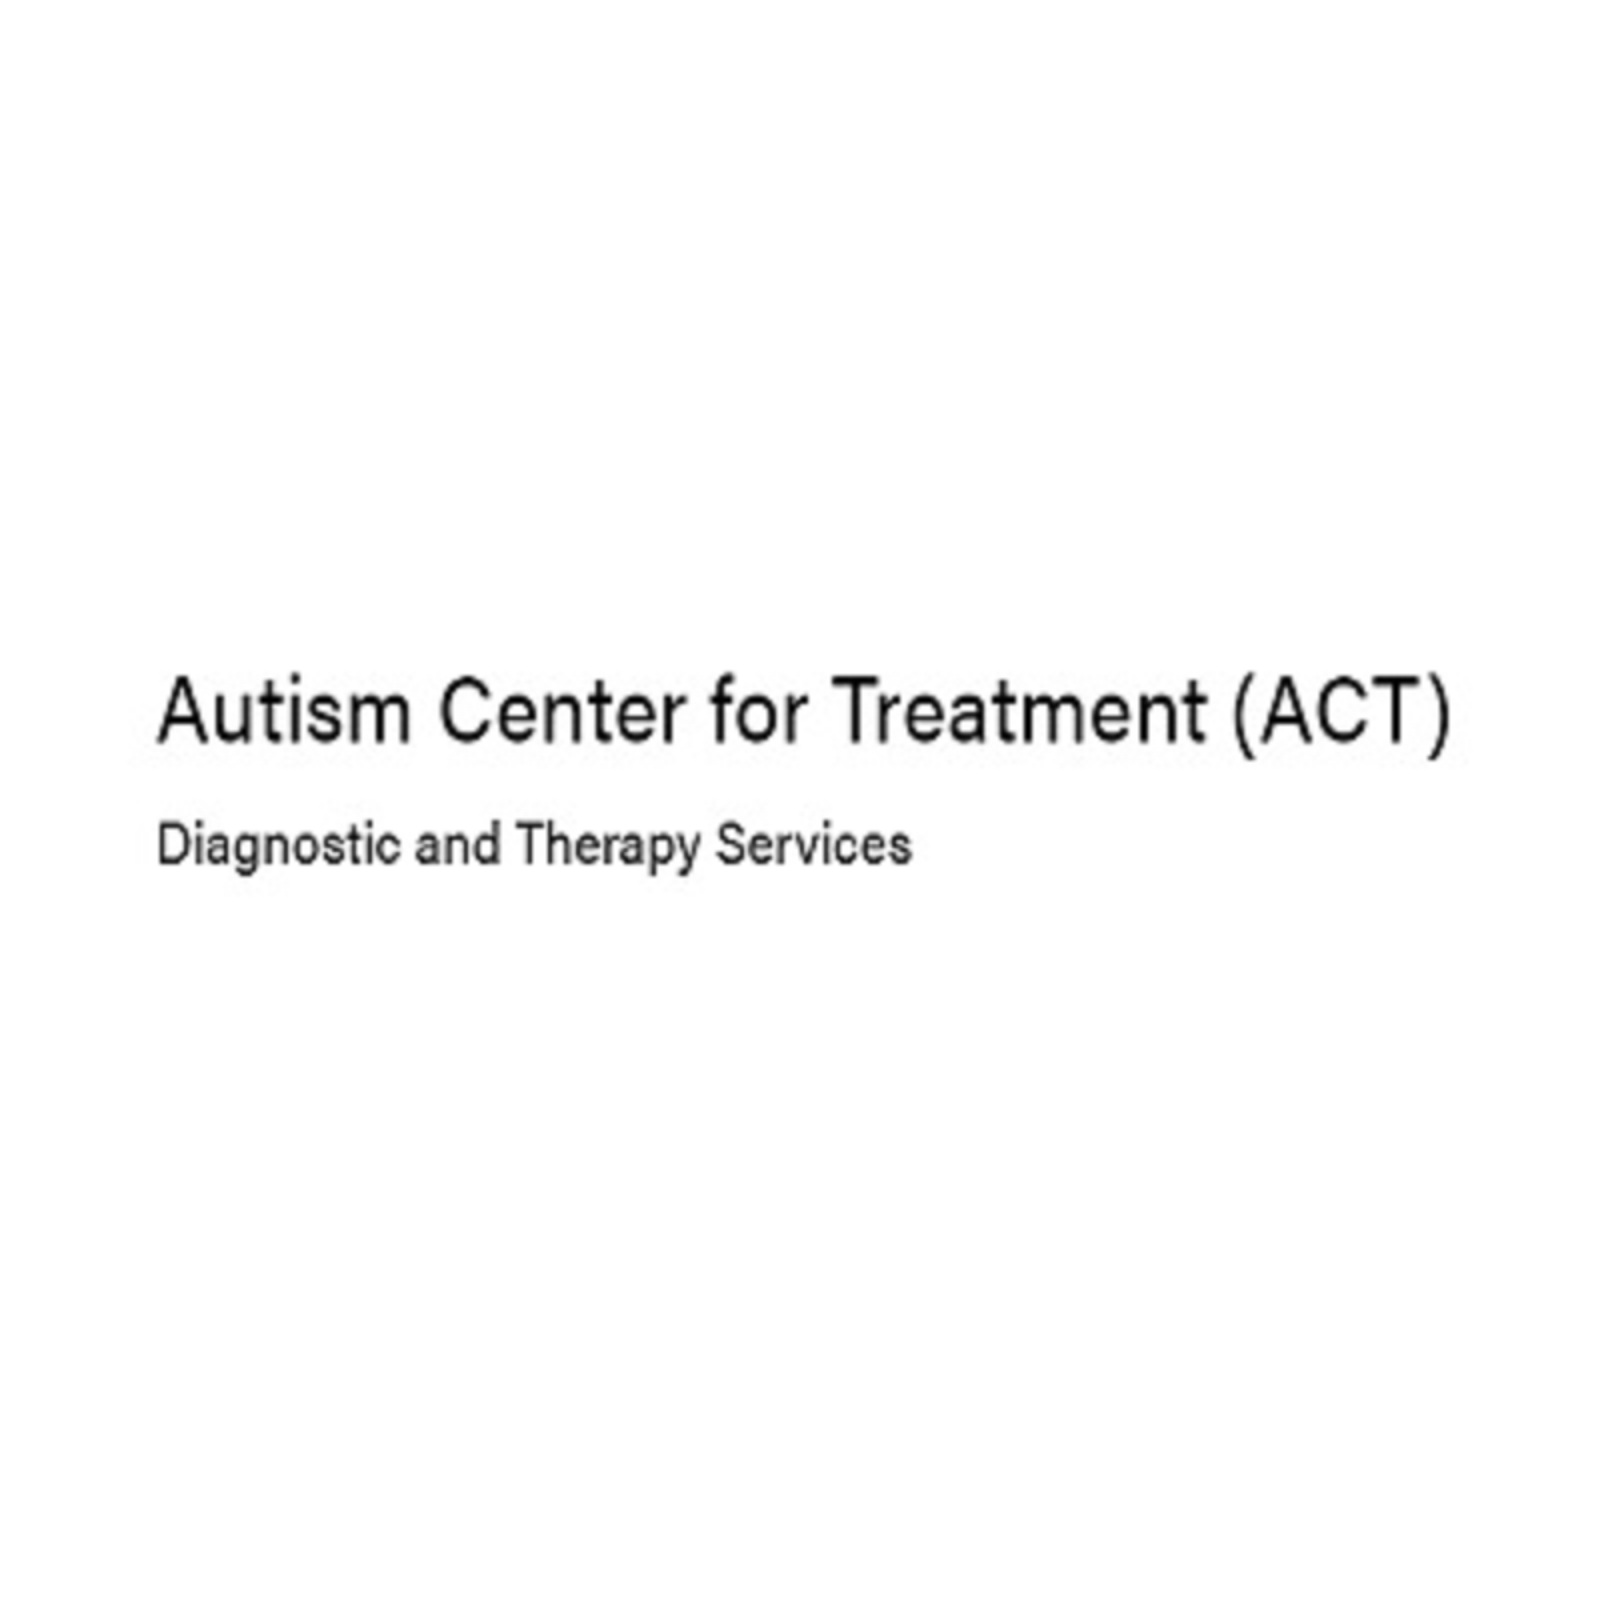 Autism Center for Treatment Cover Image